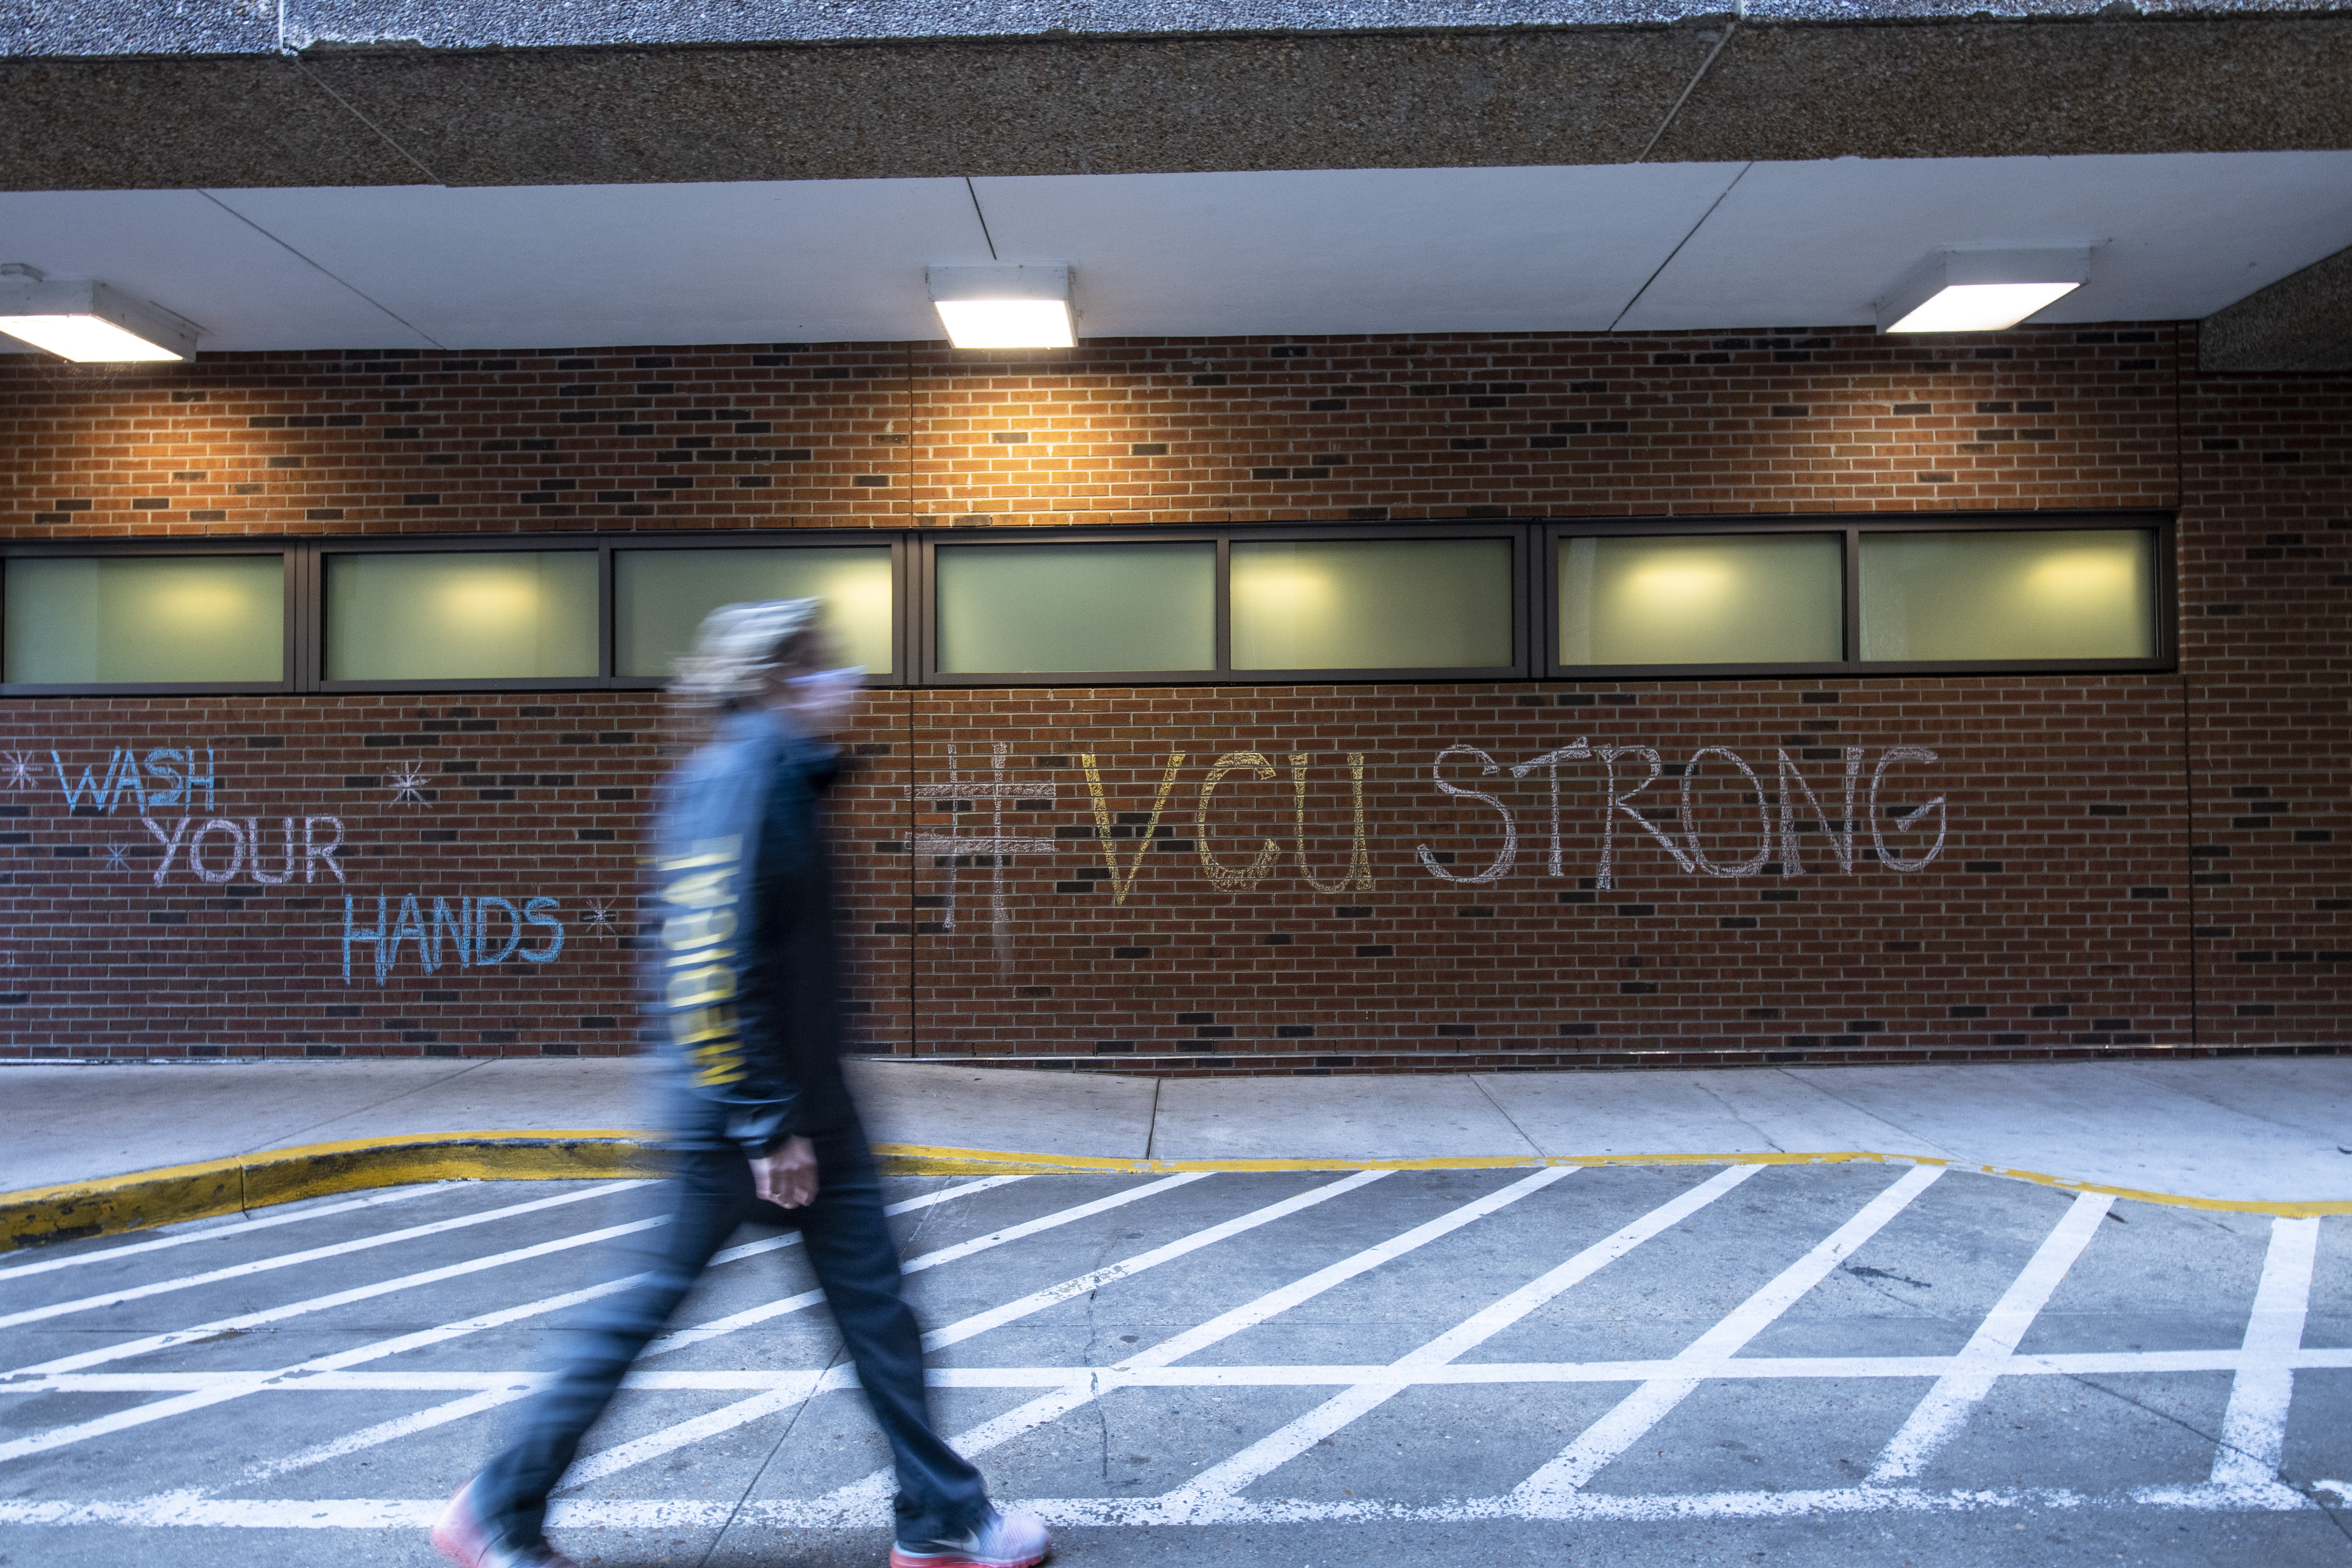 Wash your hands. #VCUStrong